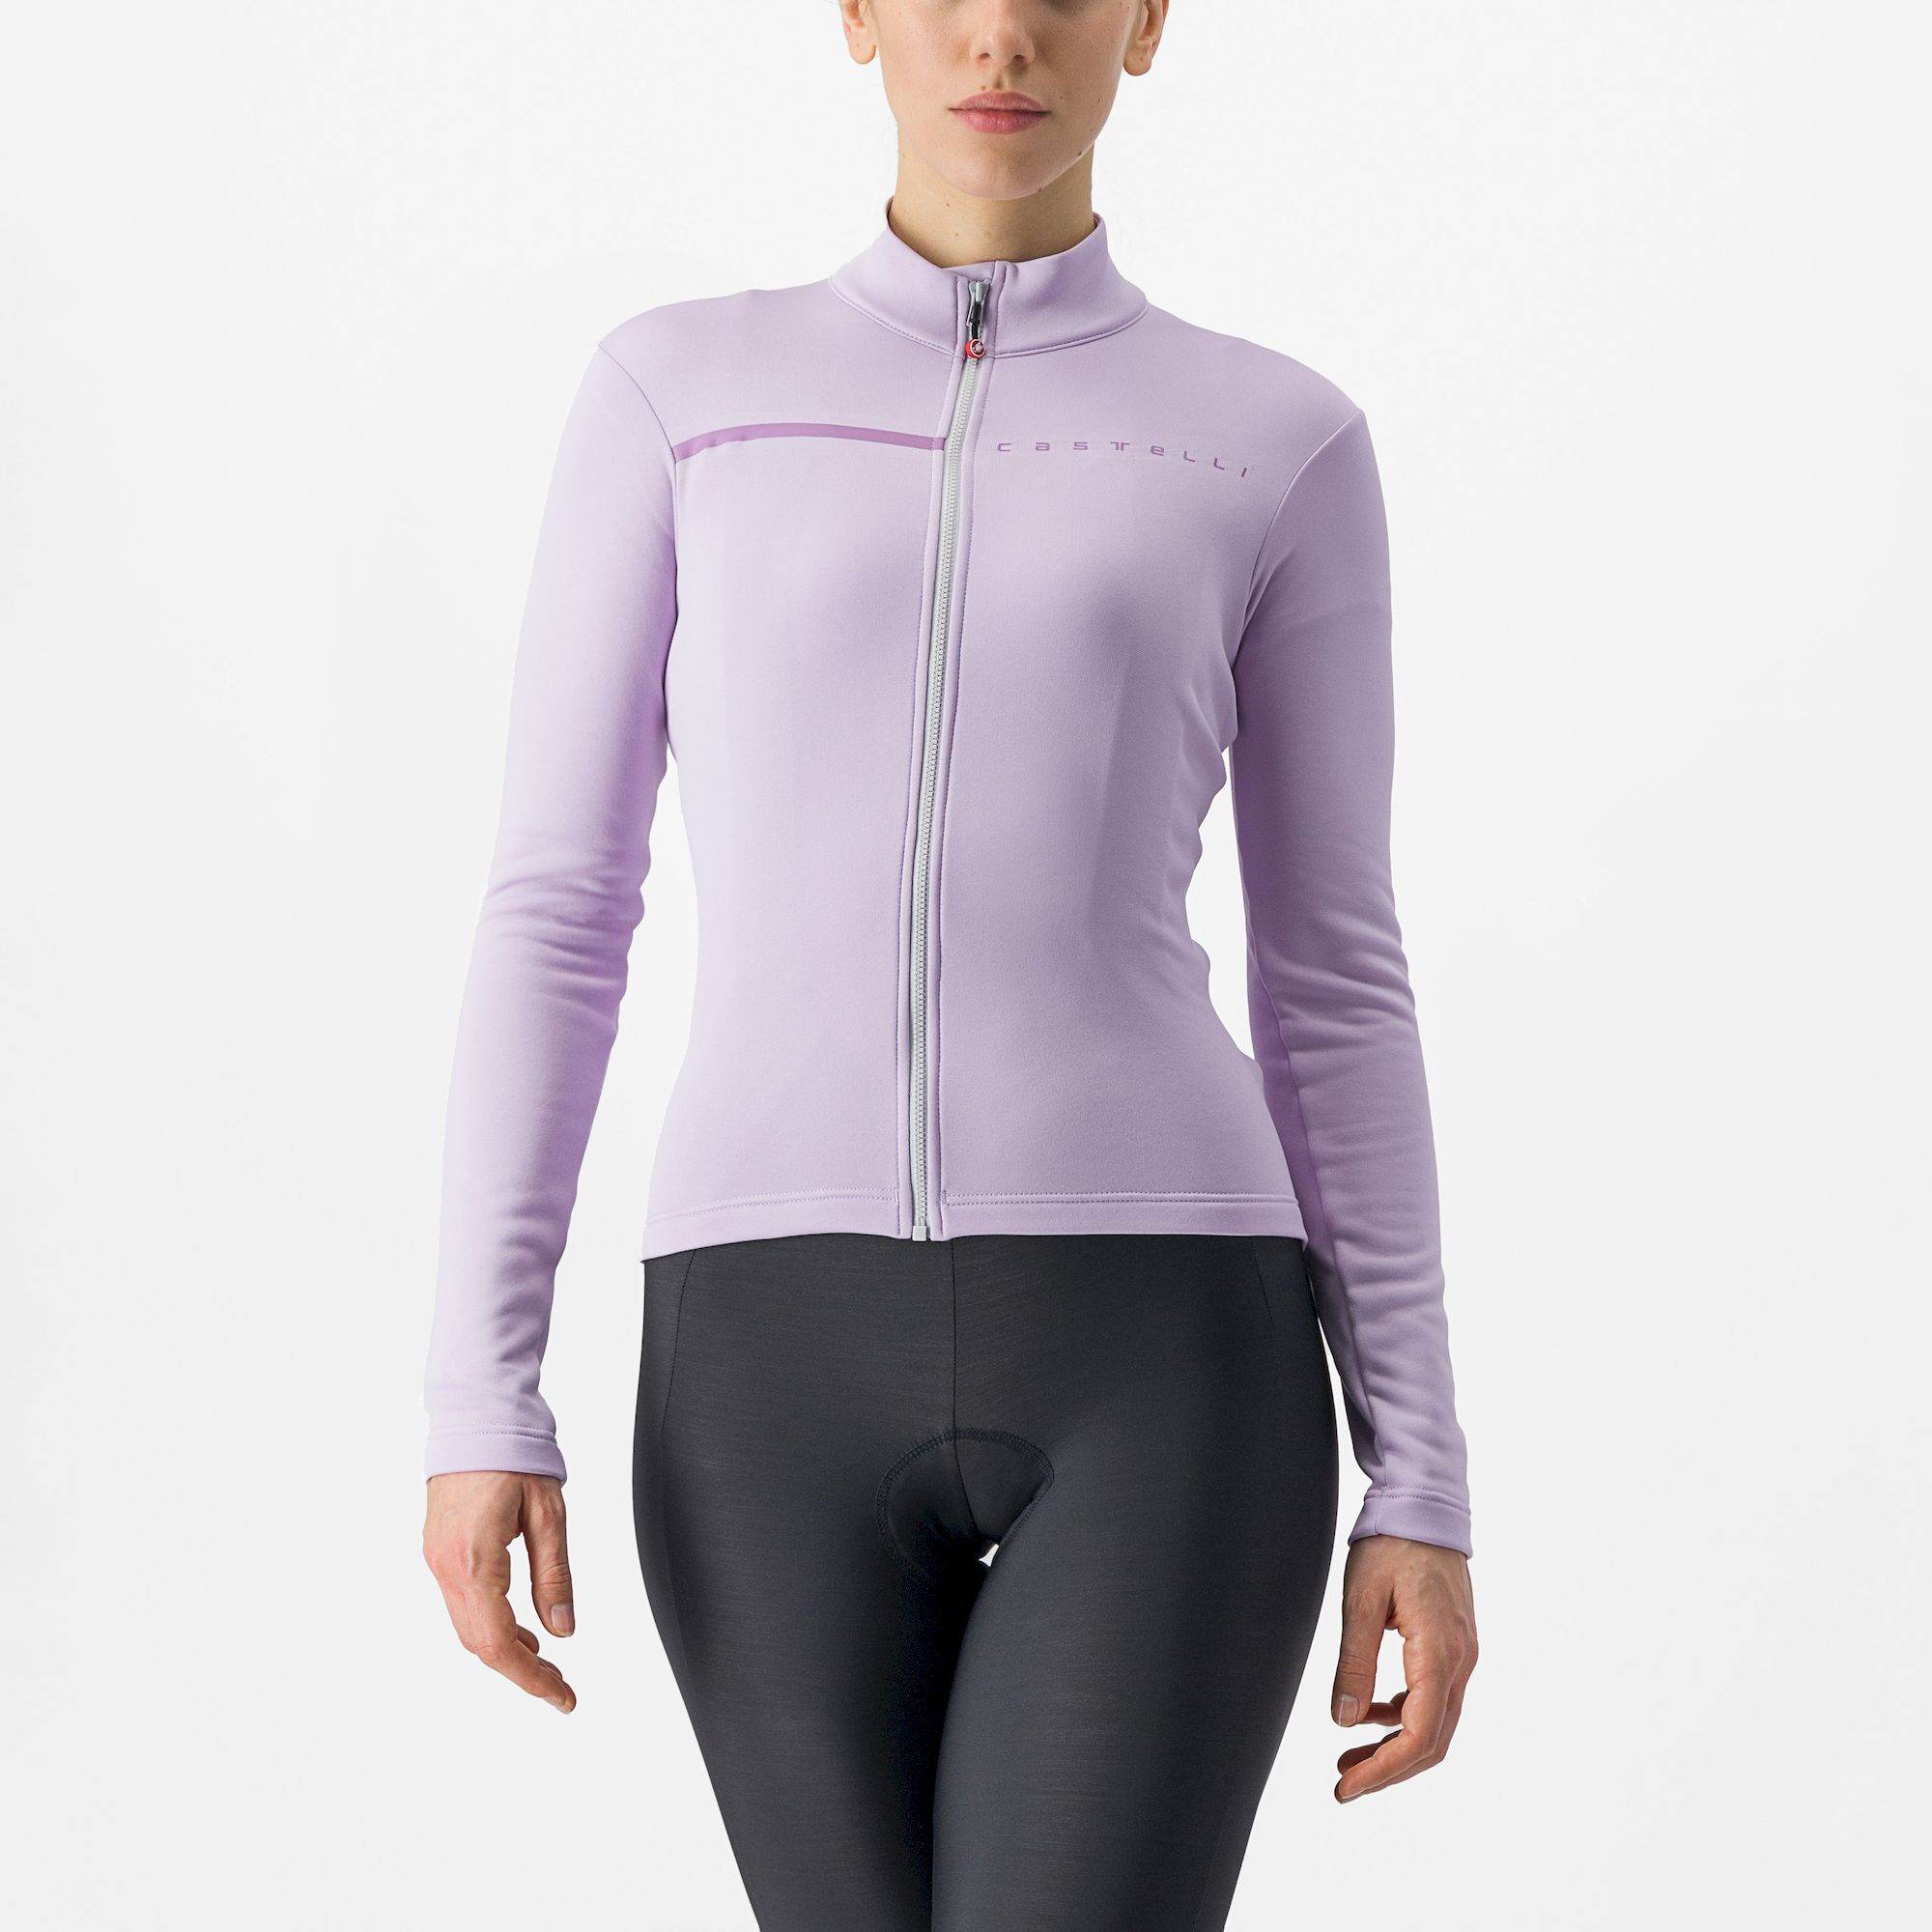 Castelli Sinergia 2 Jersey Fz - Maillot ciclismo - Mujer